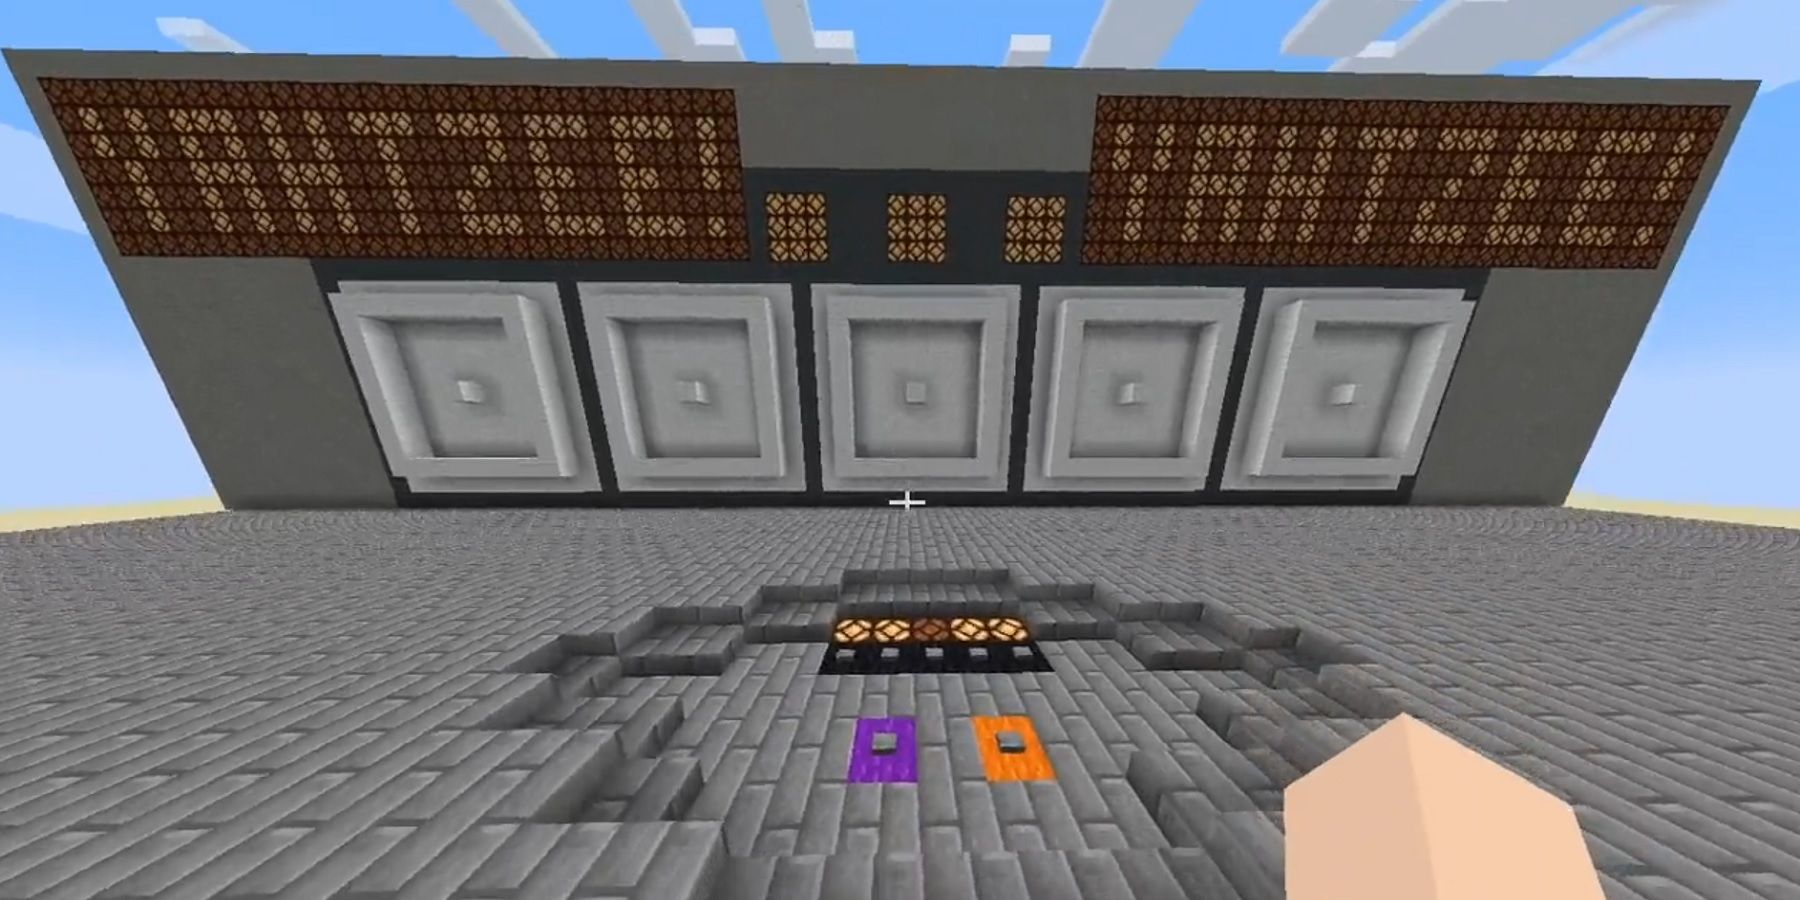 Image from Minecraft showing a Yahtzee game built using Redstone.